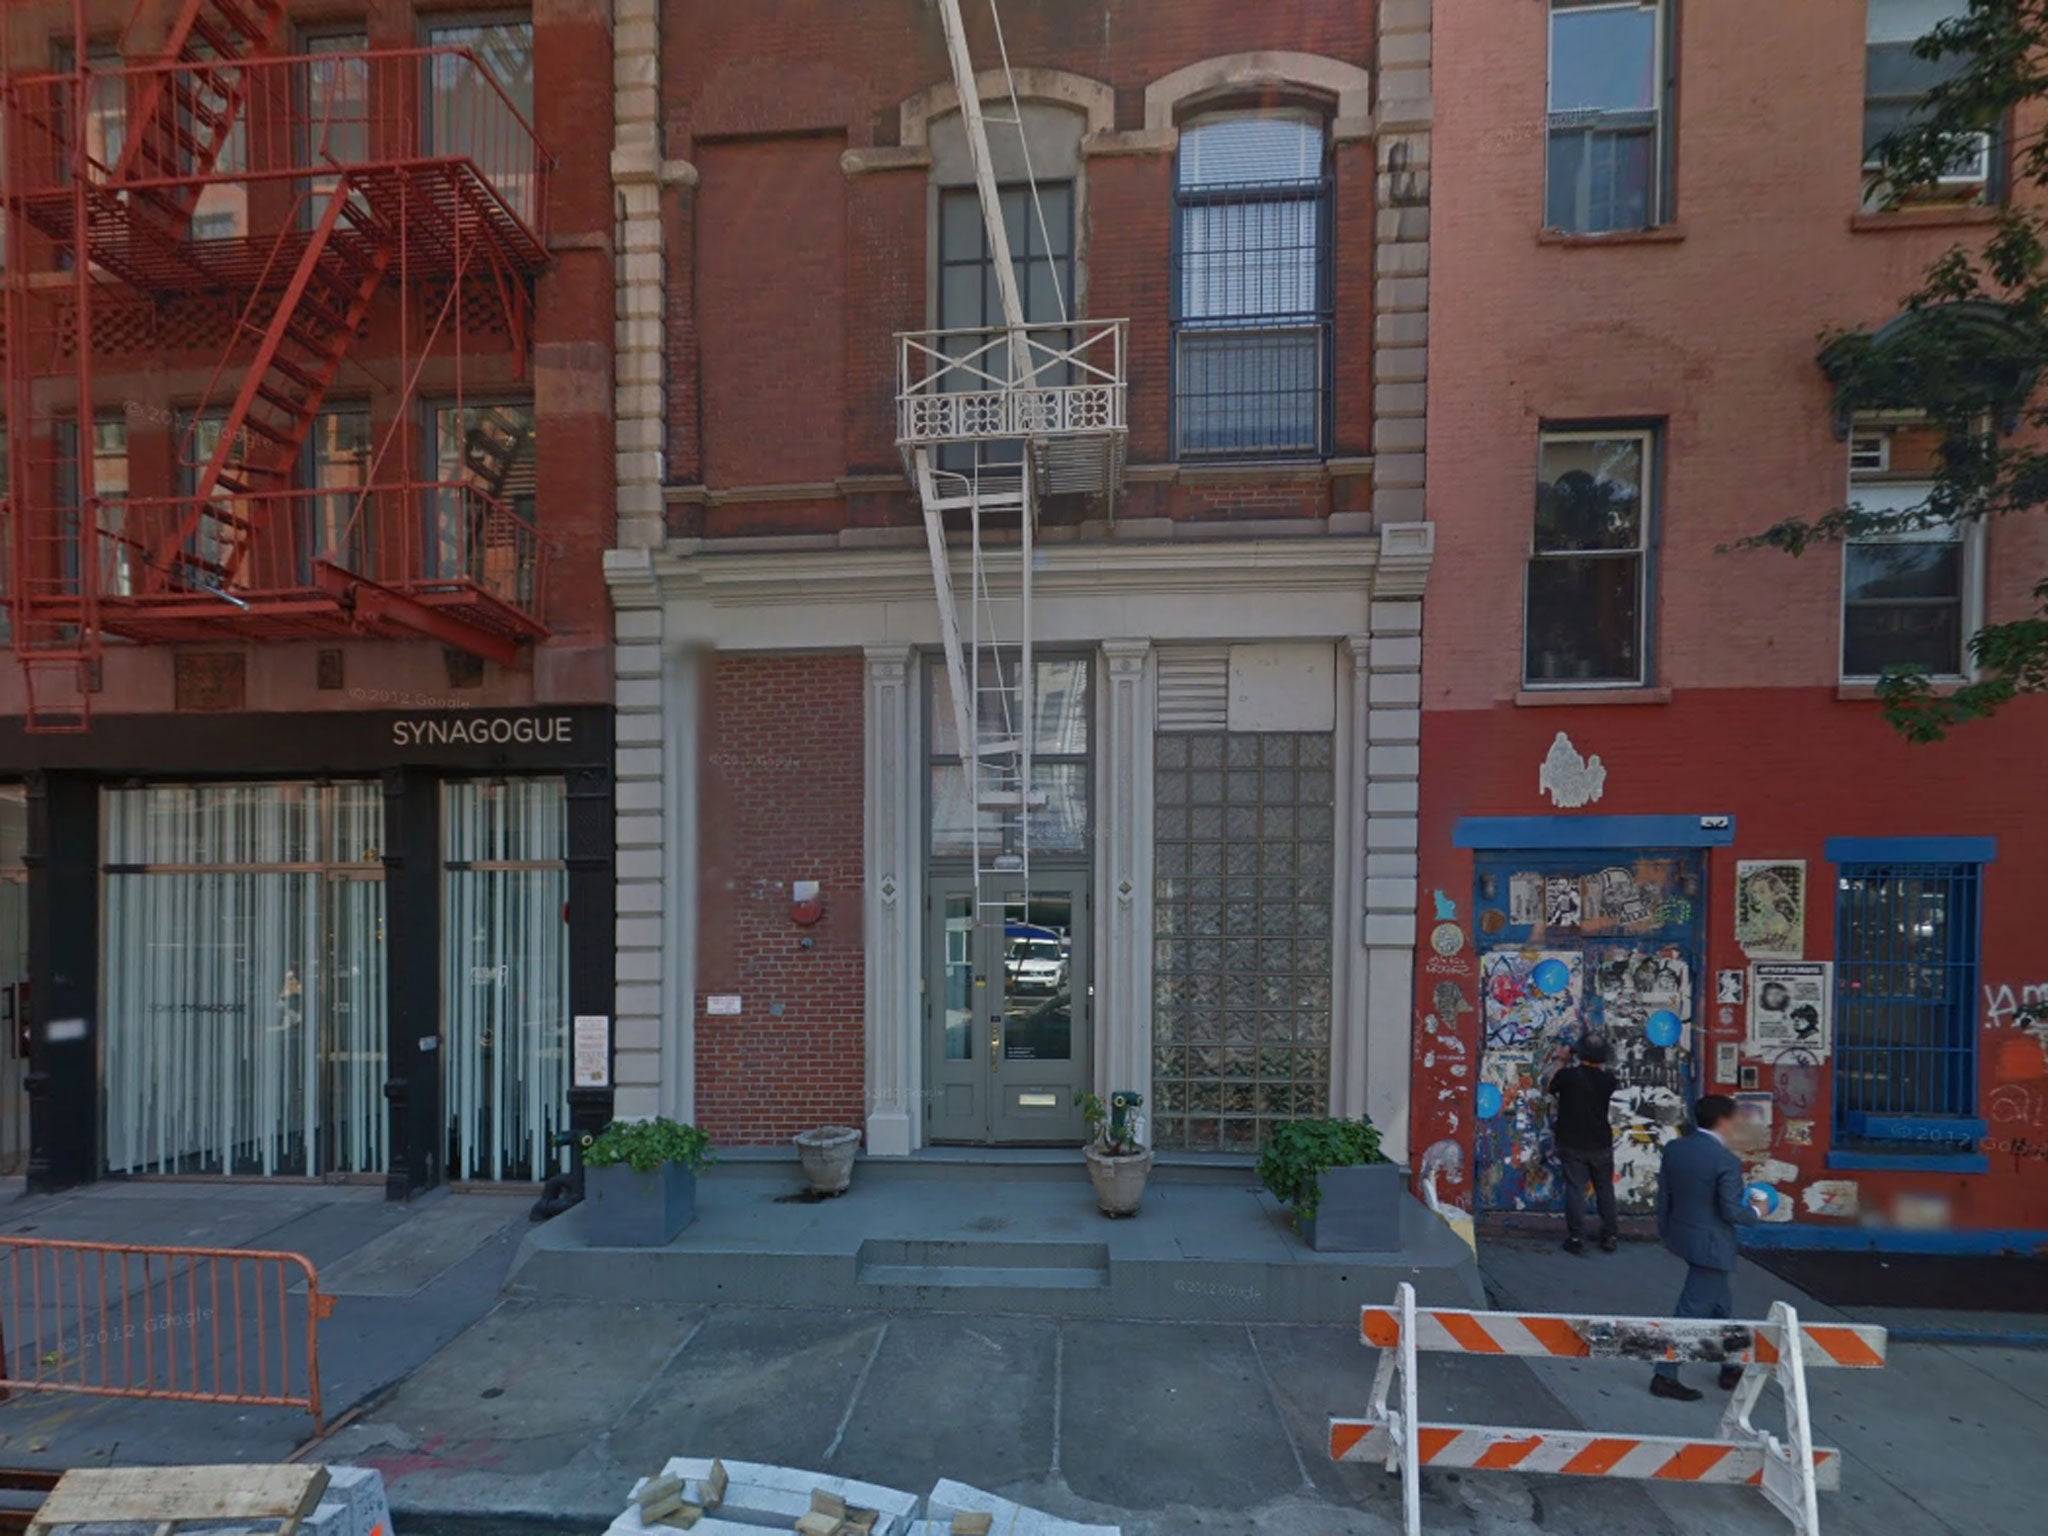 The incident happened in a building on SoHo's Crosby Street